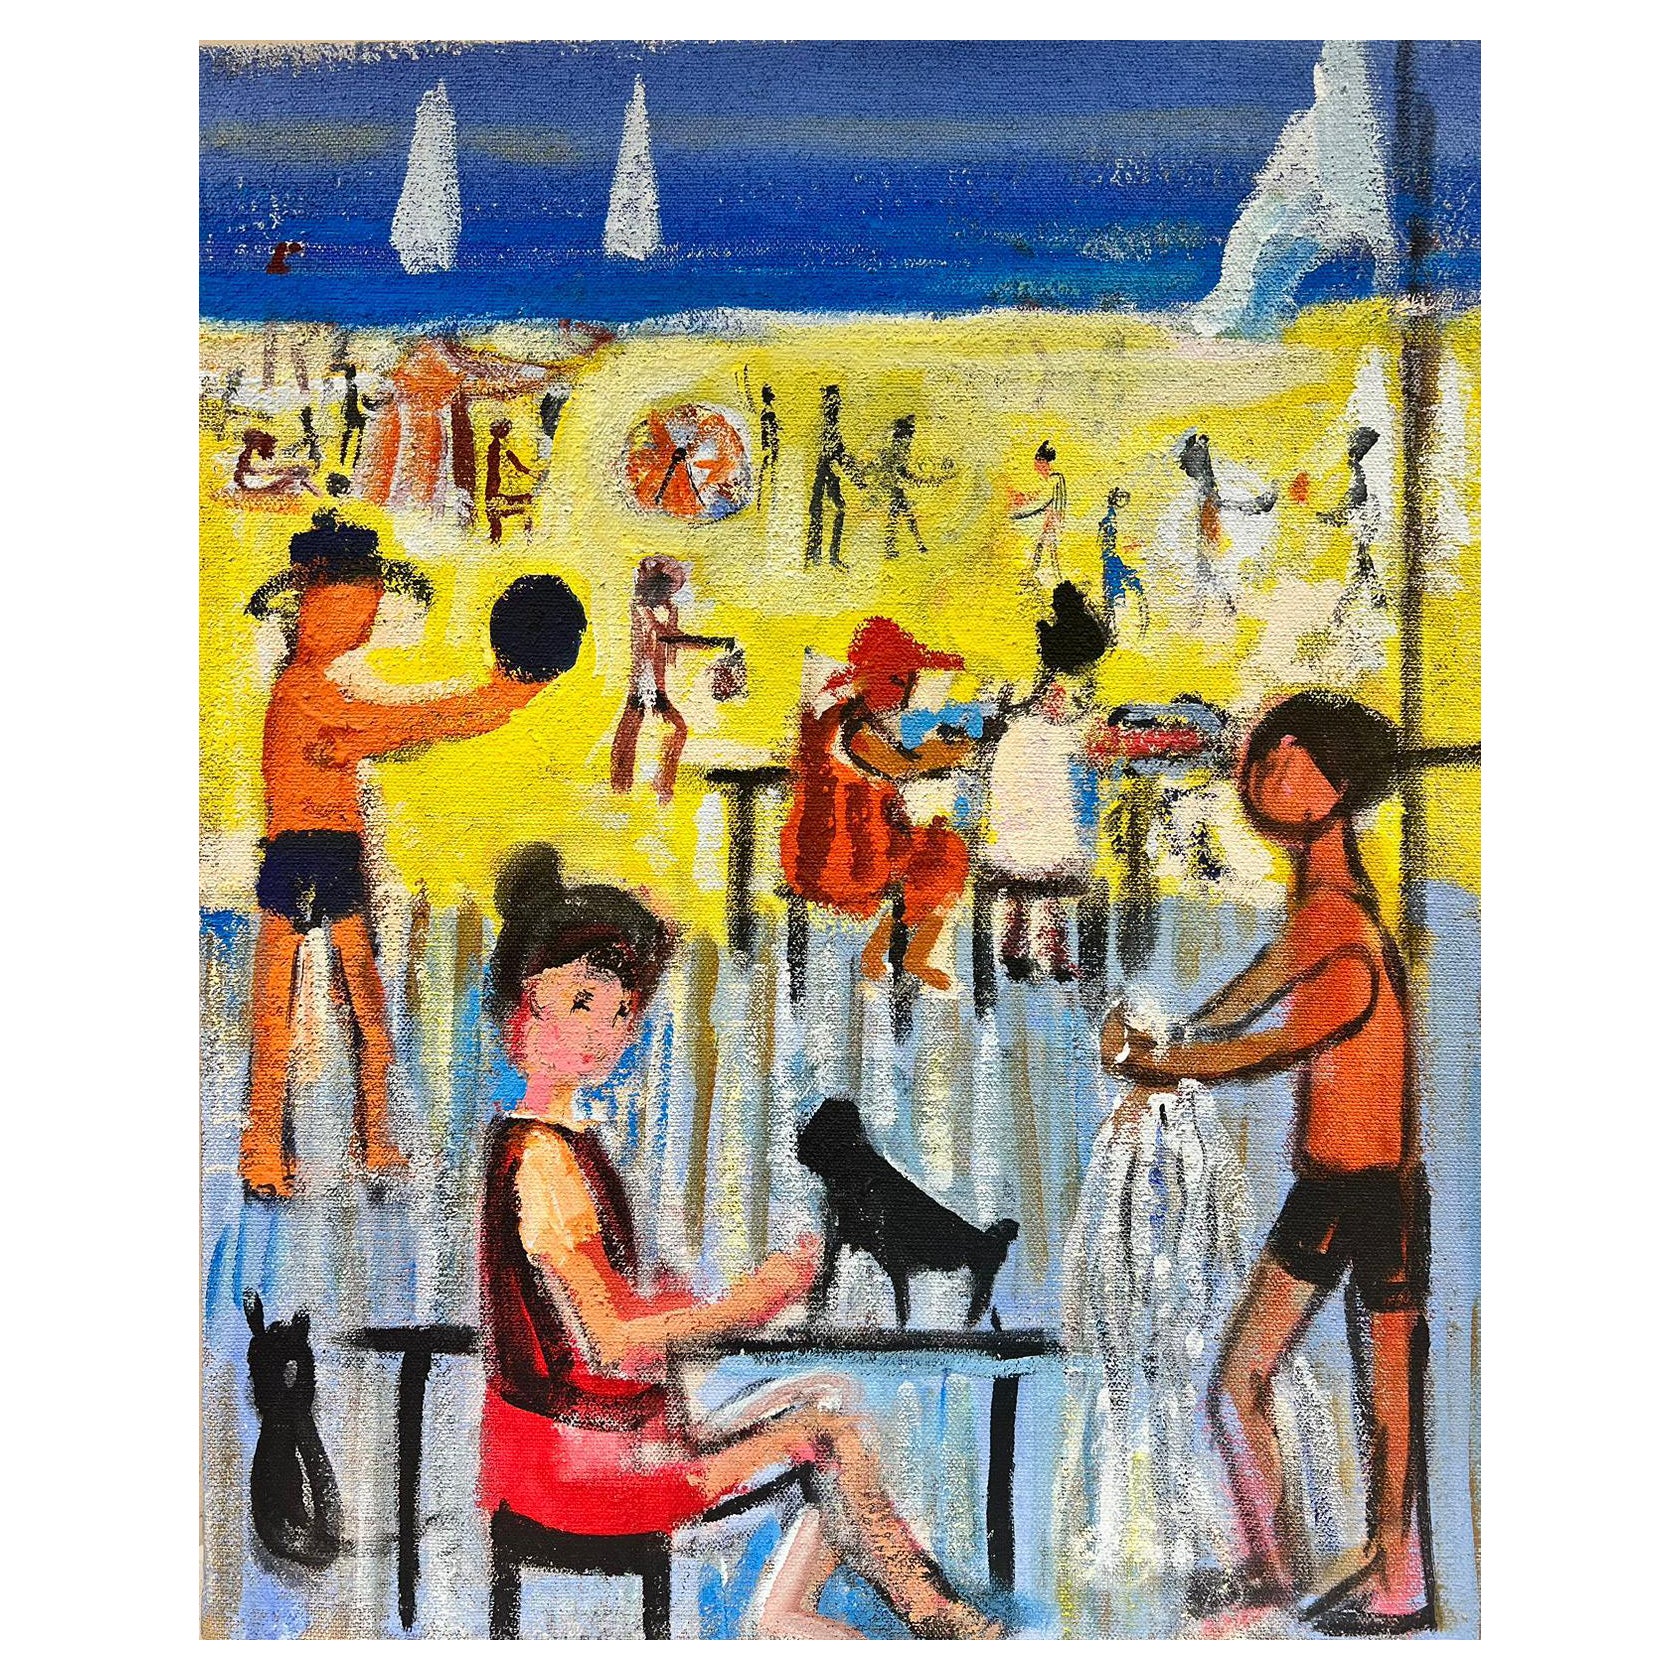 Huguette Ginet-Lasnier  Figurative Painting - Large French Contemporary Modernist Oil Painting Figures Playing on Sunny Beach